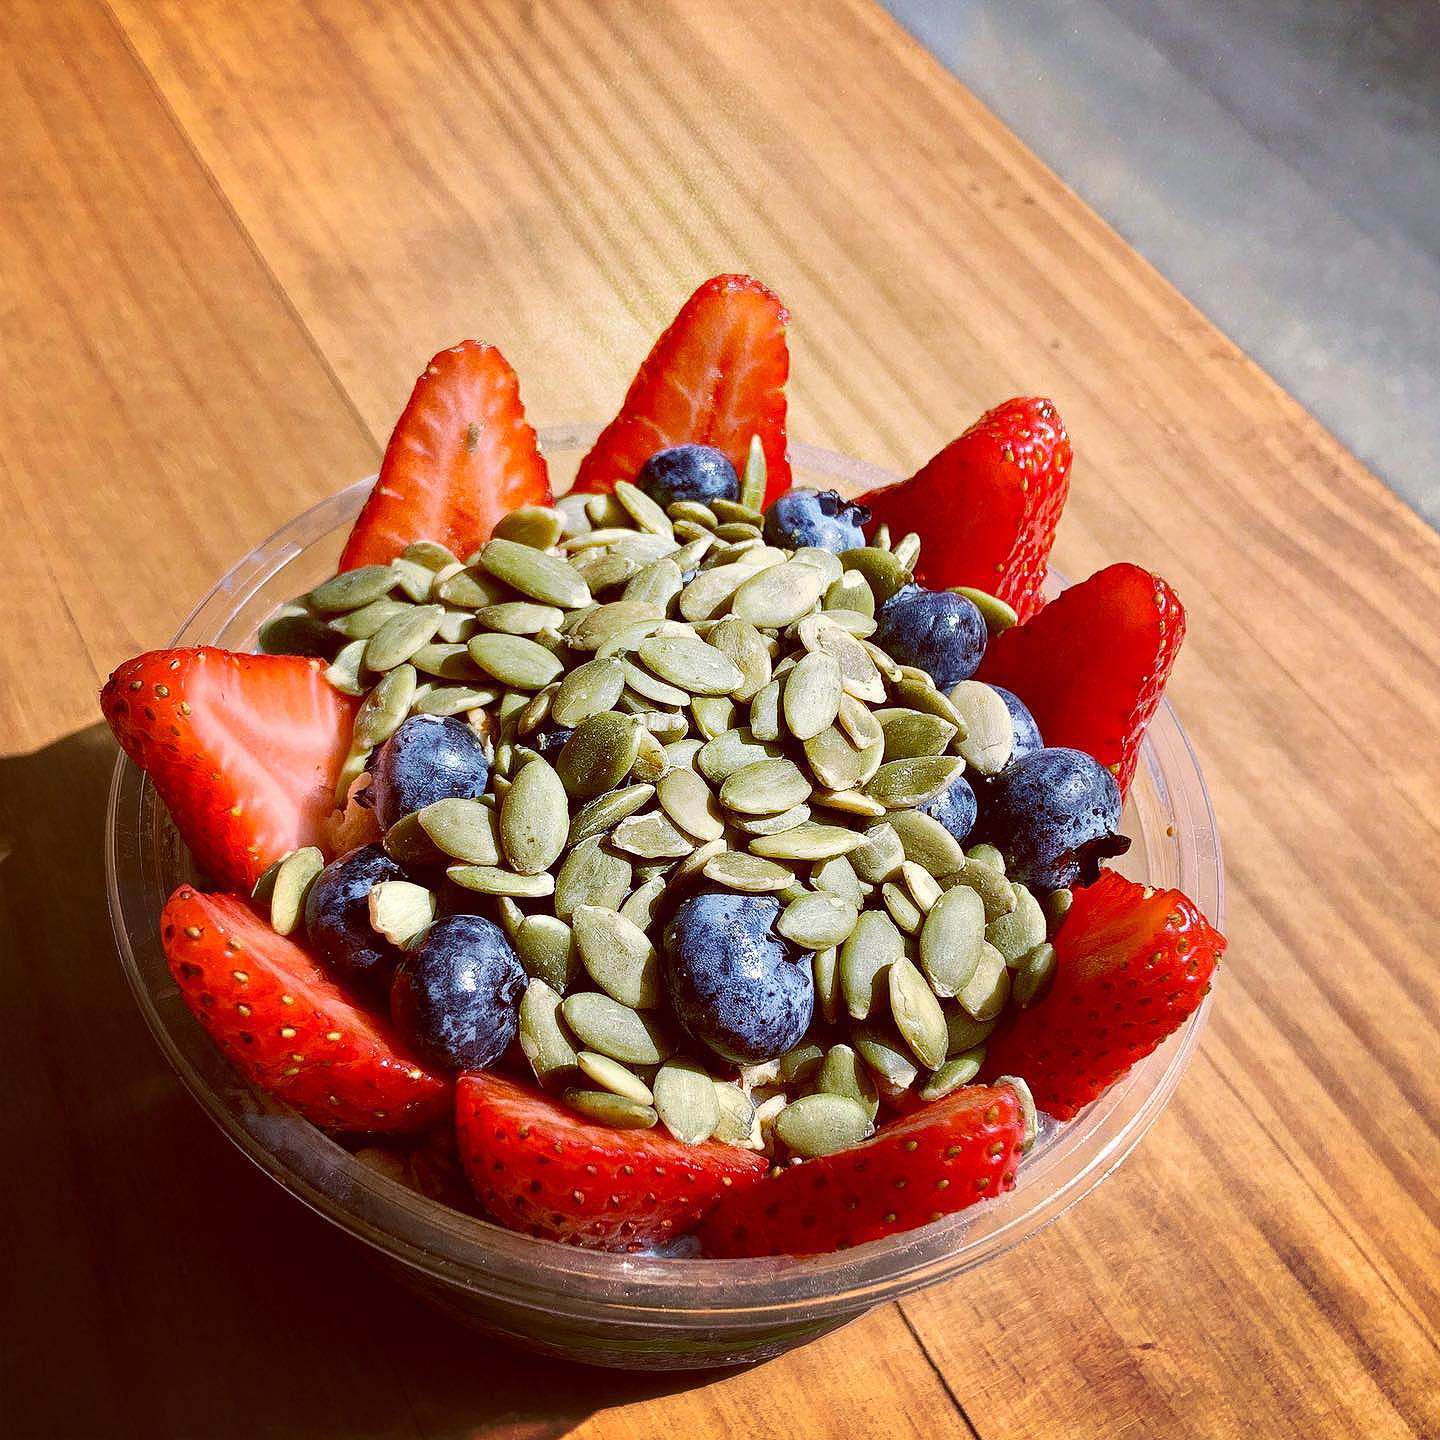 acai bowl very berries, strawberry and sunflower seeds